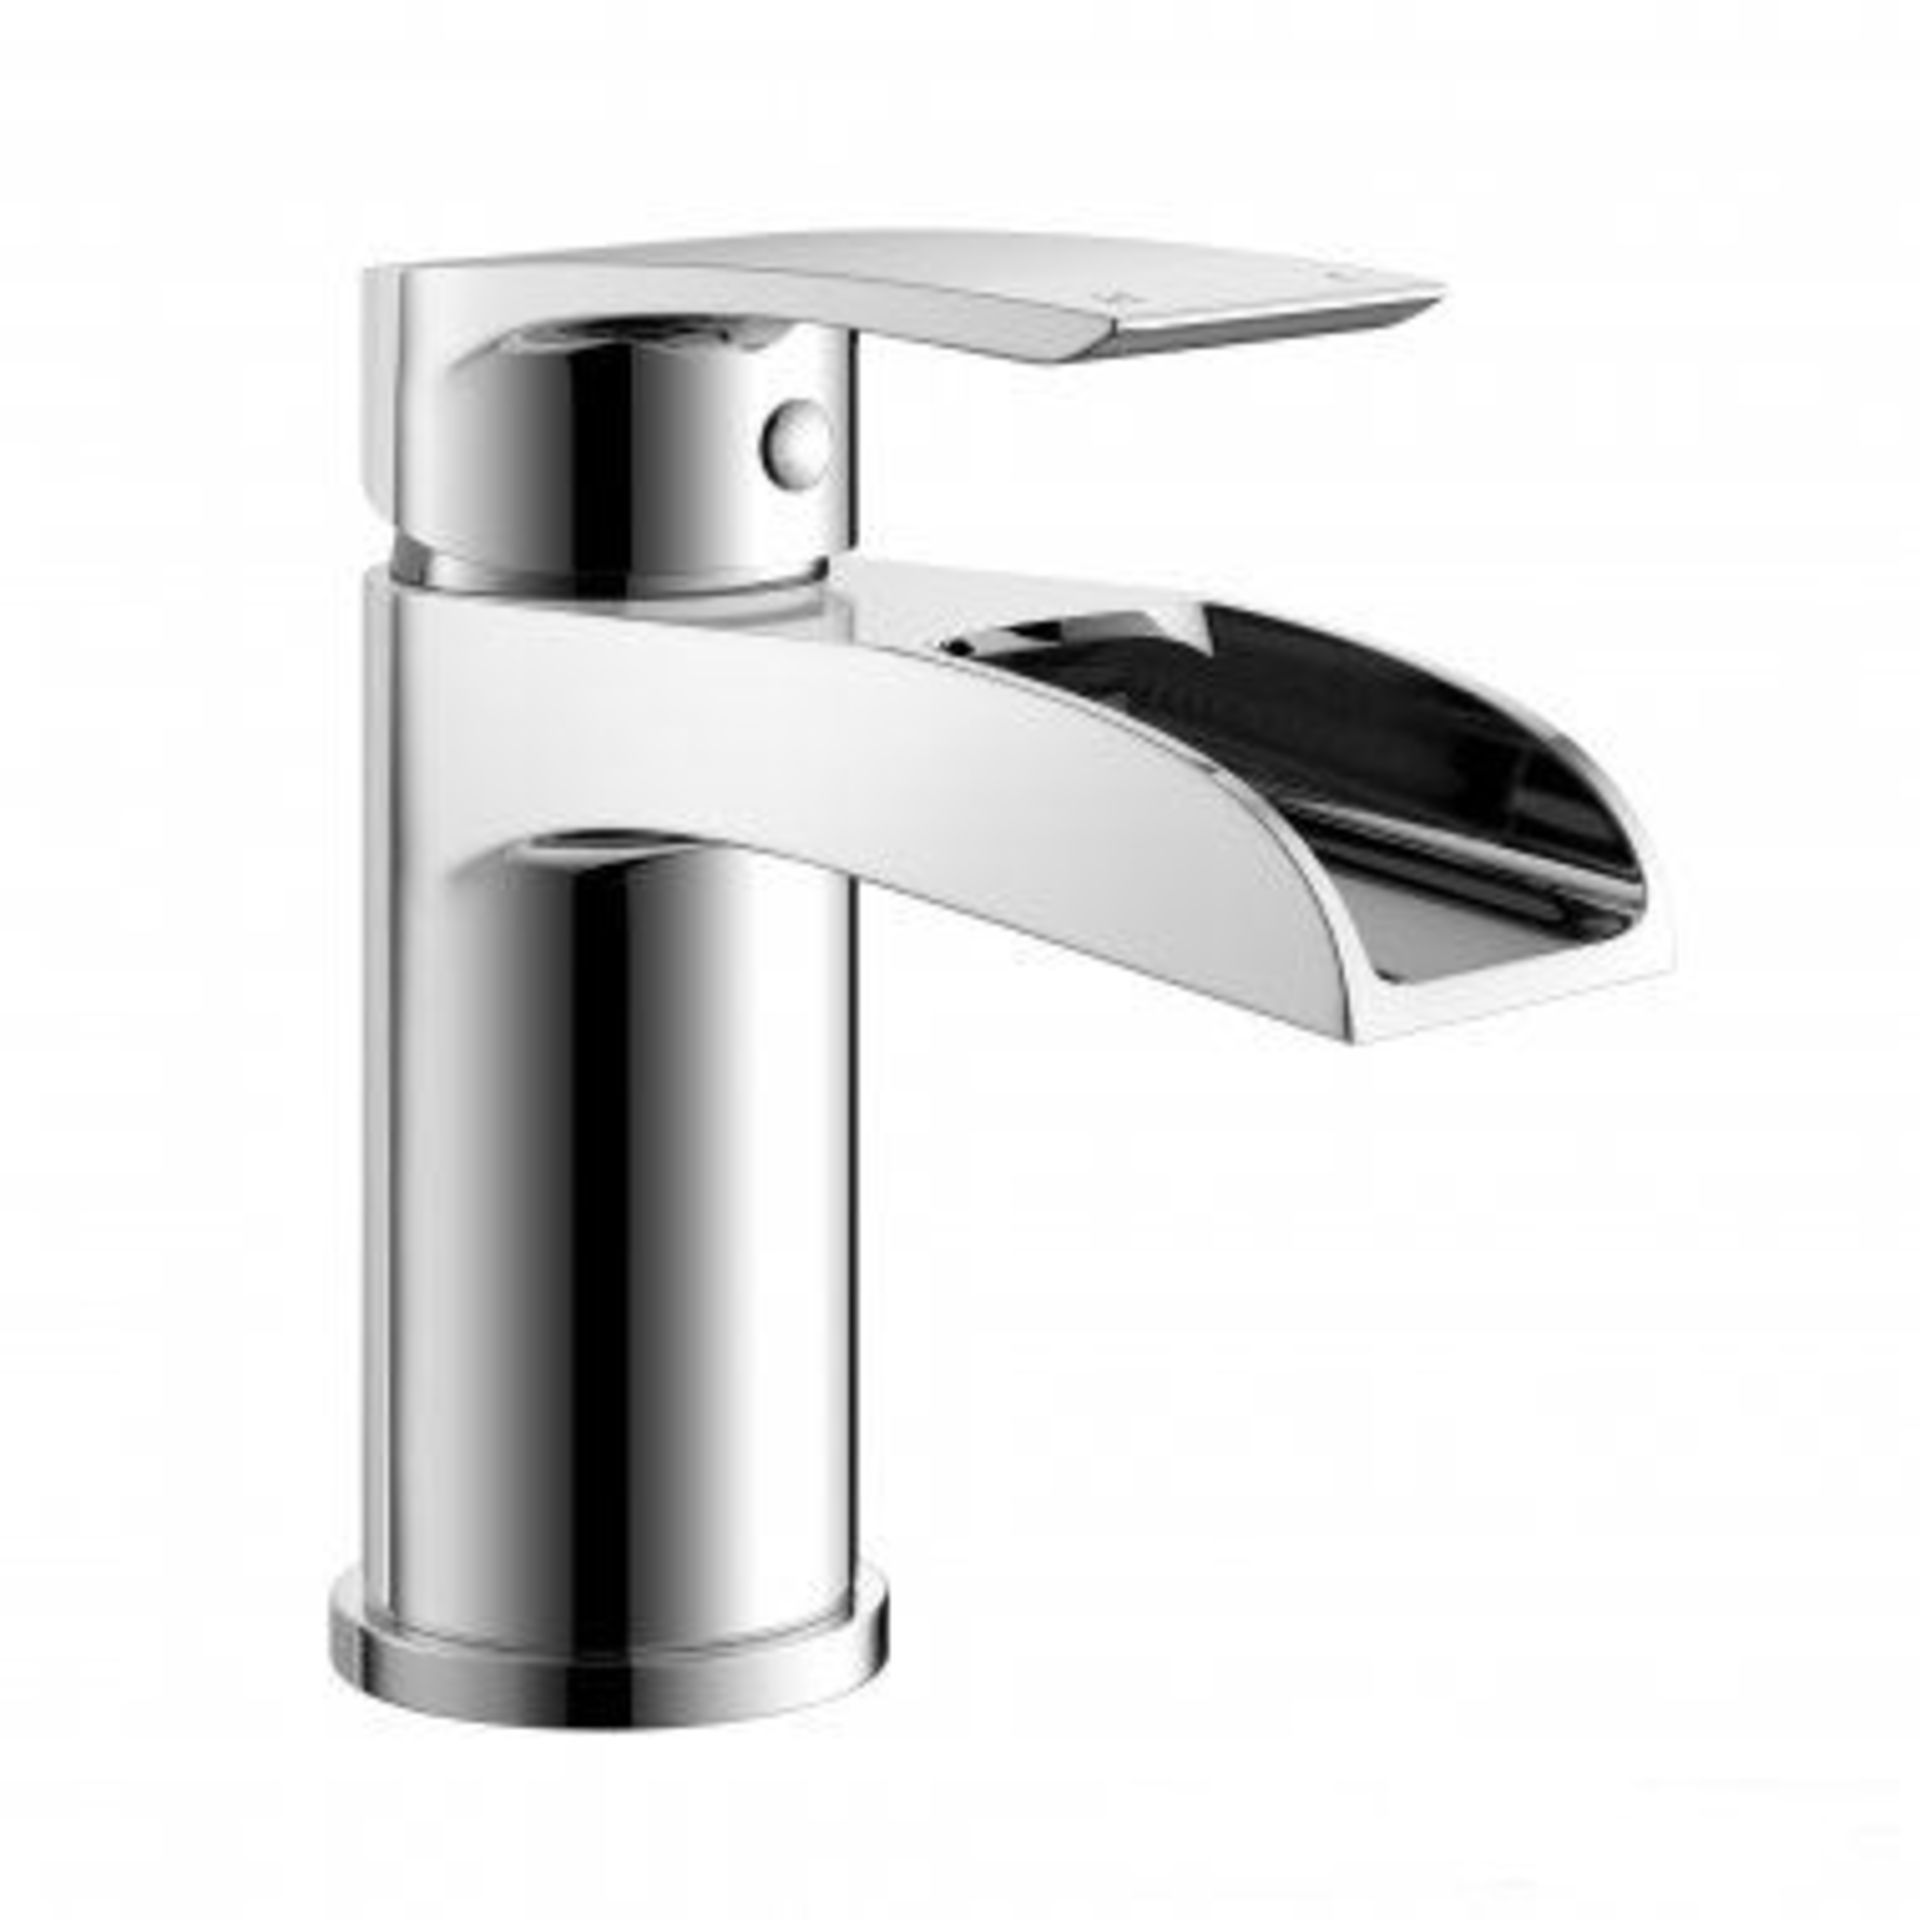 New & Boxed Avis Waterfall Basin Mixer Tap. Tb151.Chrome Plated Solid Brass Mirror Finish Lates - Image 2 of 2